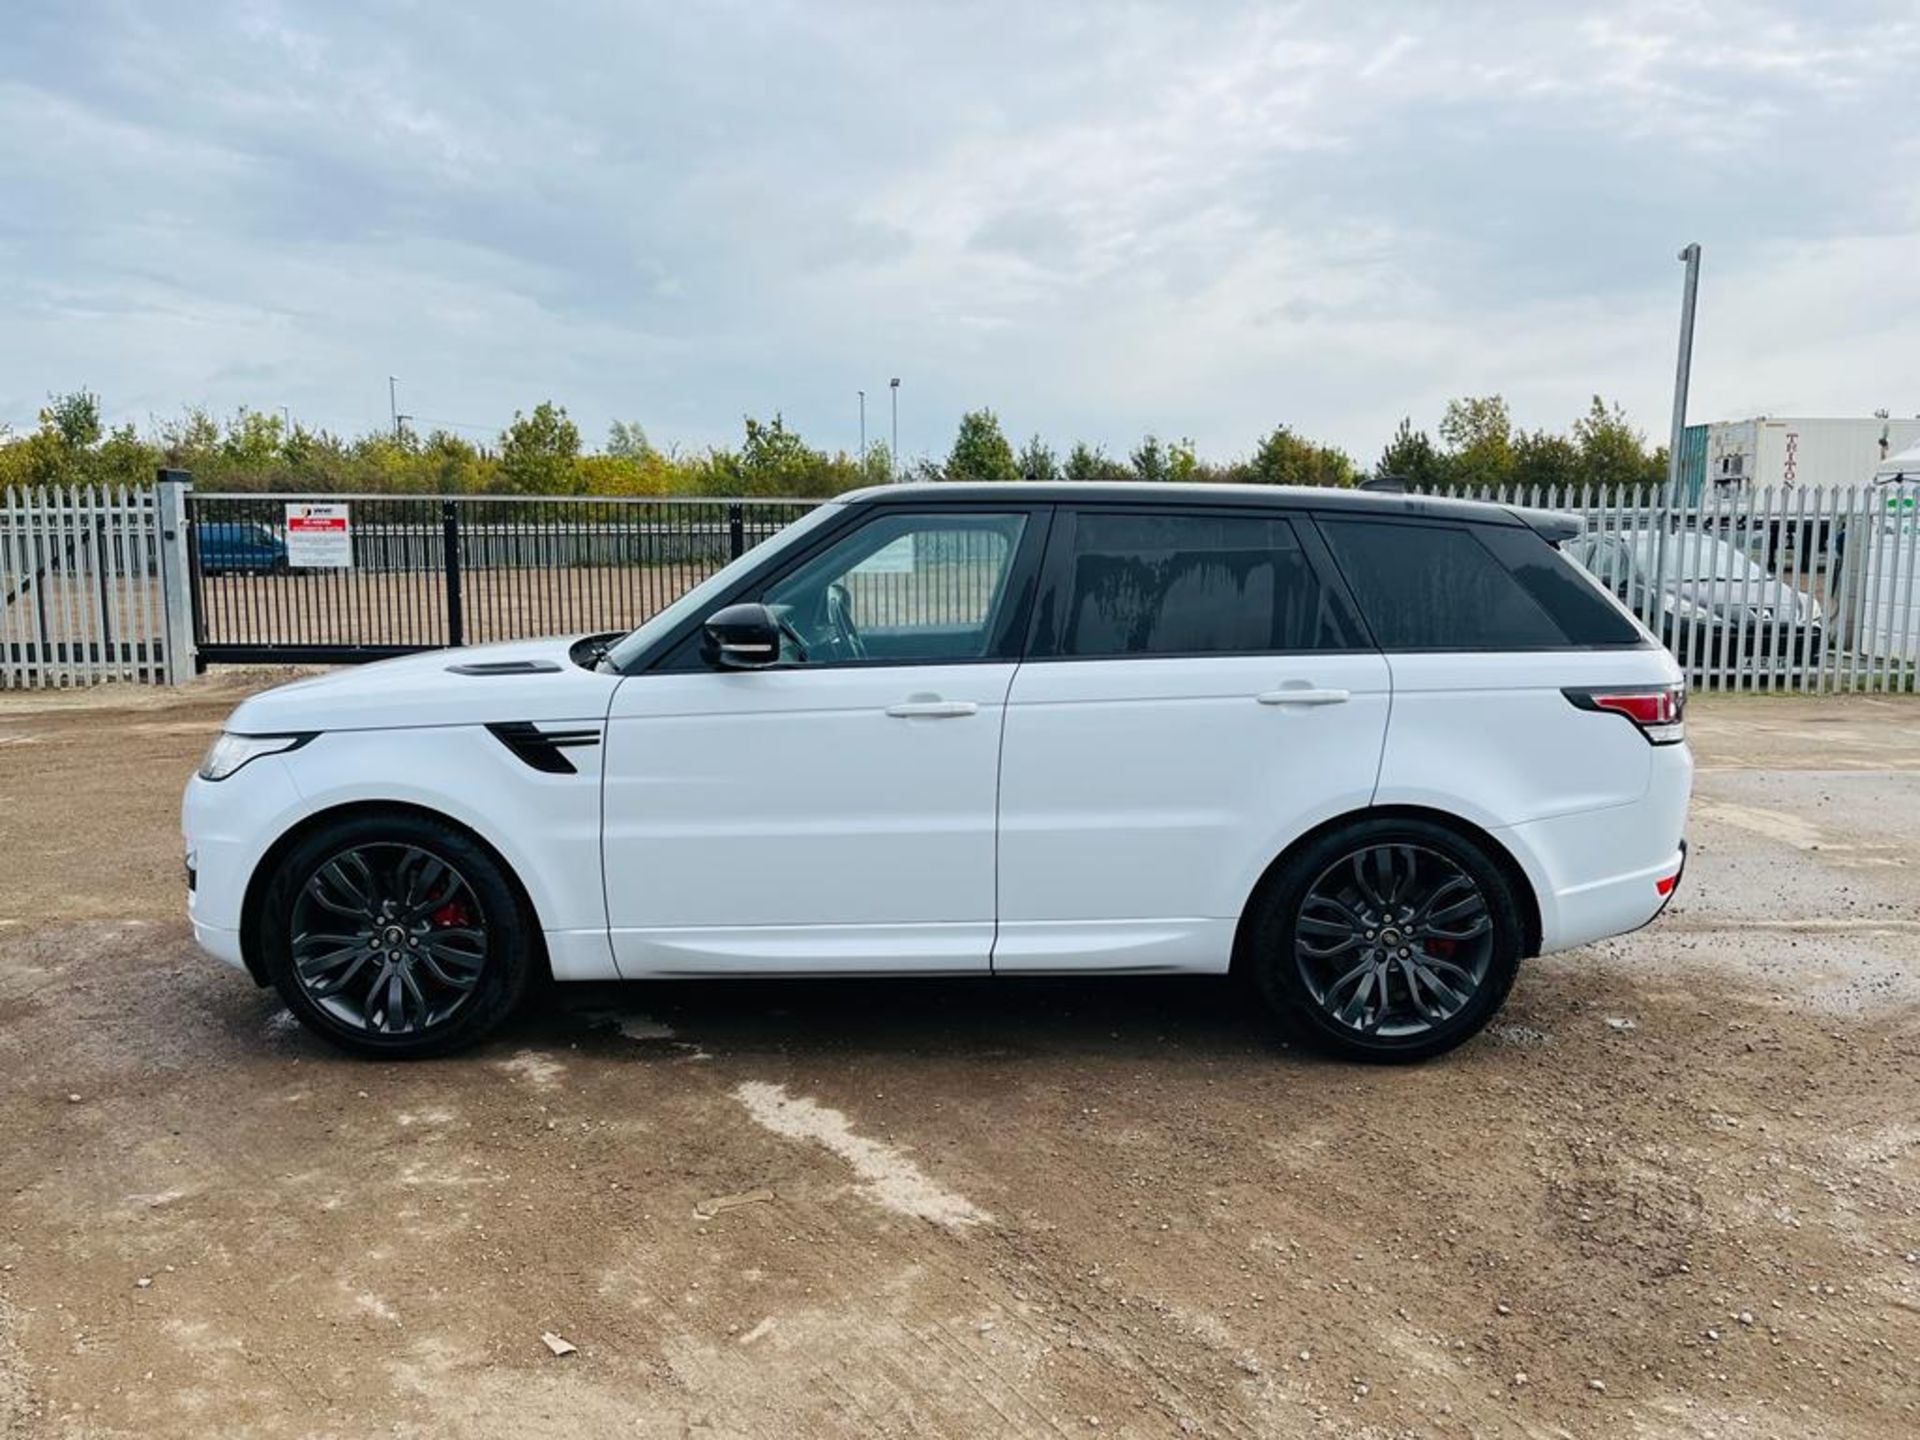 ** ON SALE ** Land Rover Range Rover Sport 3.0 SDV6 306 HSE DYNAMIC 4WD 2017 (66 Reg) - A/C - Image 12 of 32